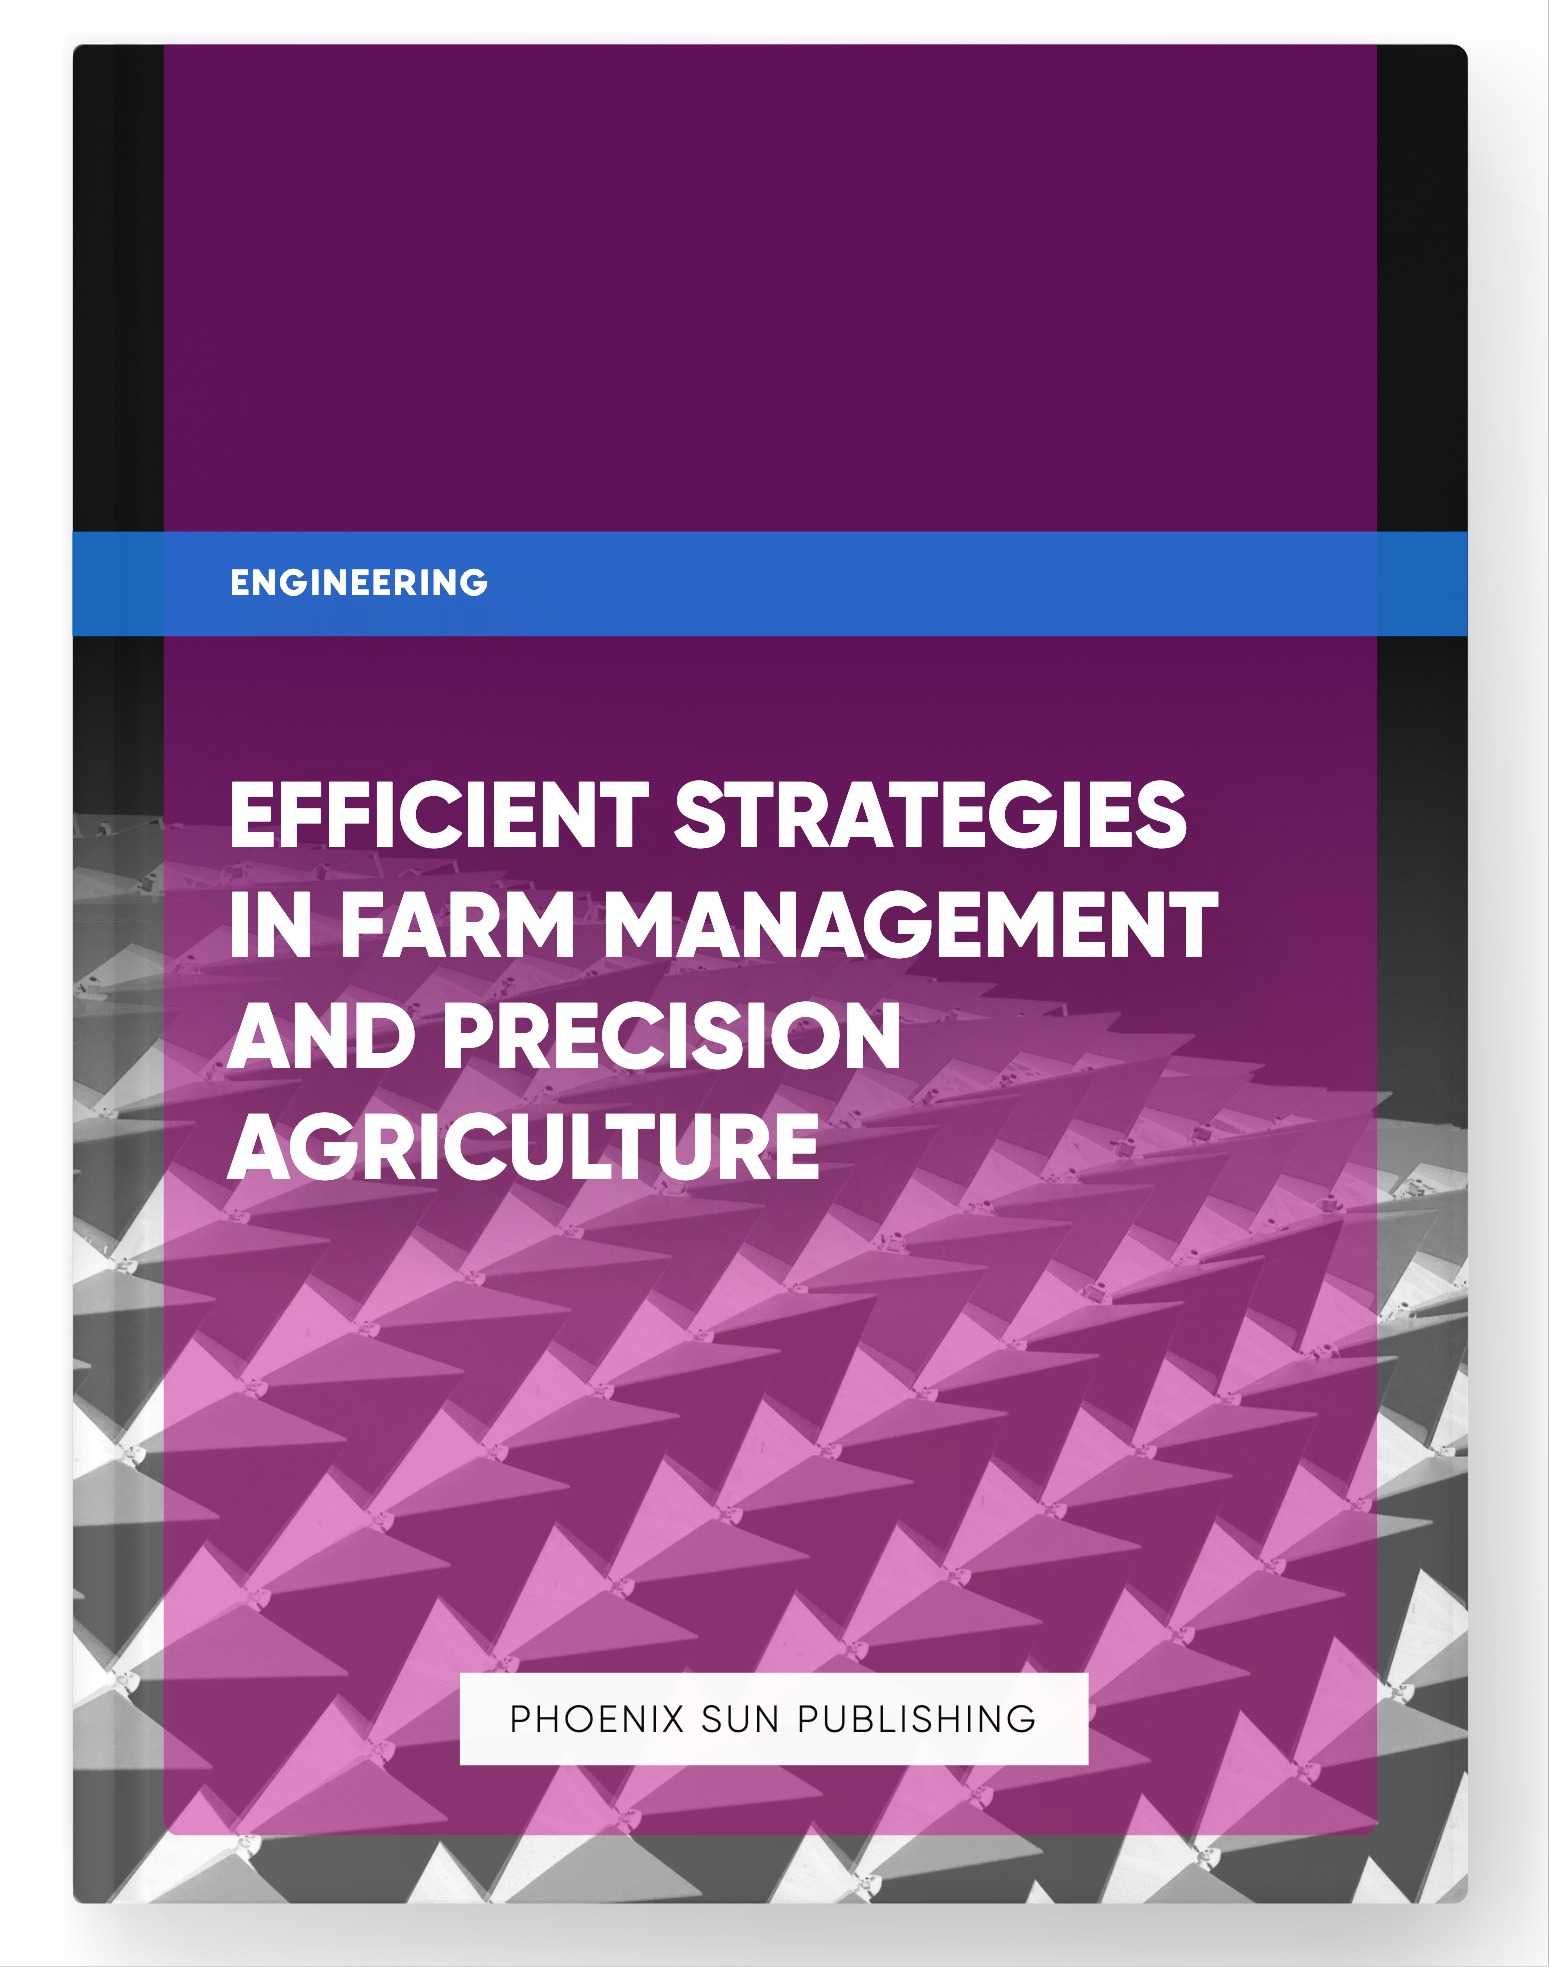 Efficient Strategies in Farm Management and Precision Agriculture